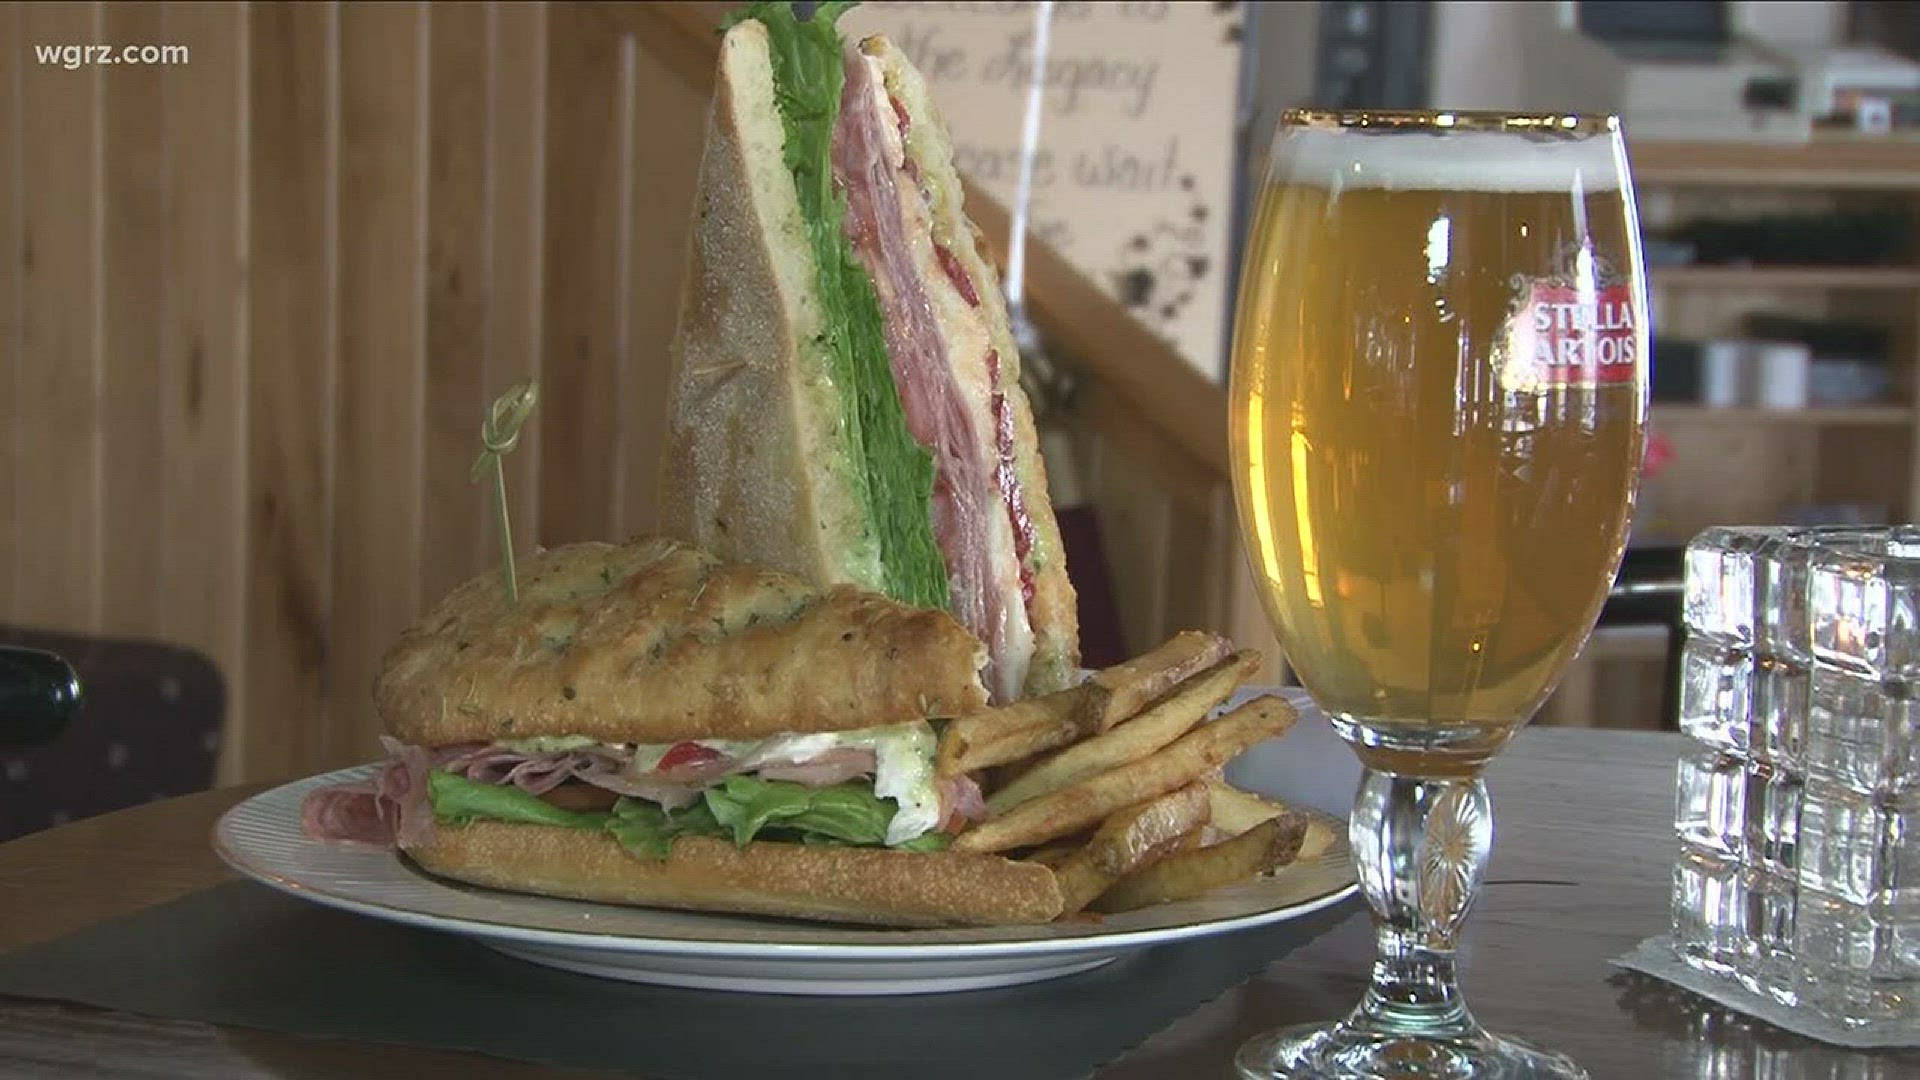 If you're looking for a bite to eat you might find a bit of history at a unique spot in Springville. It's called The Legacy and you're about to see why the name fits.